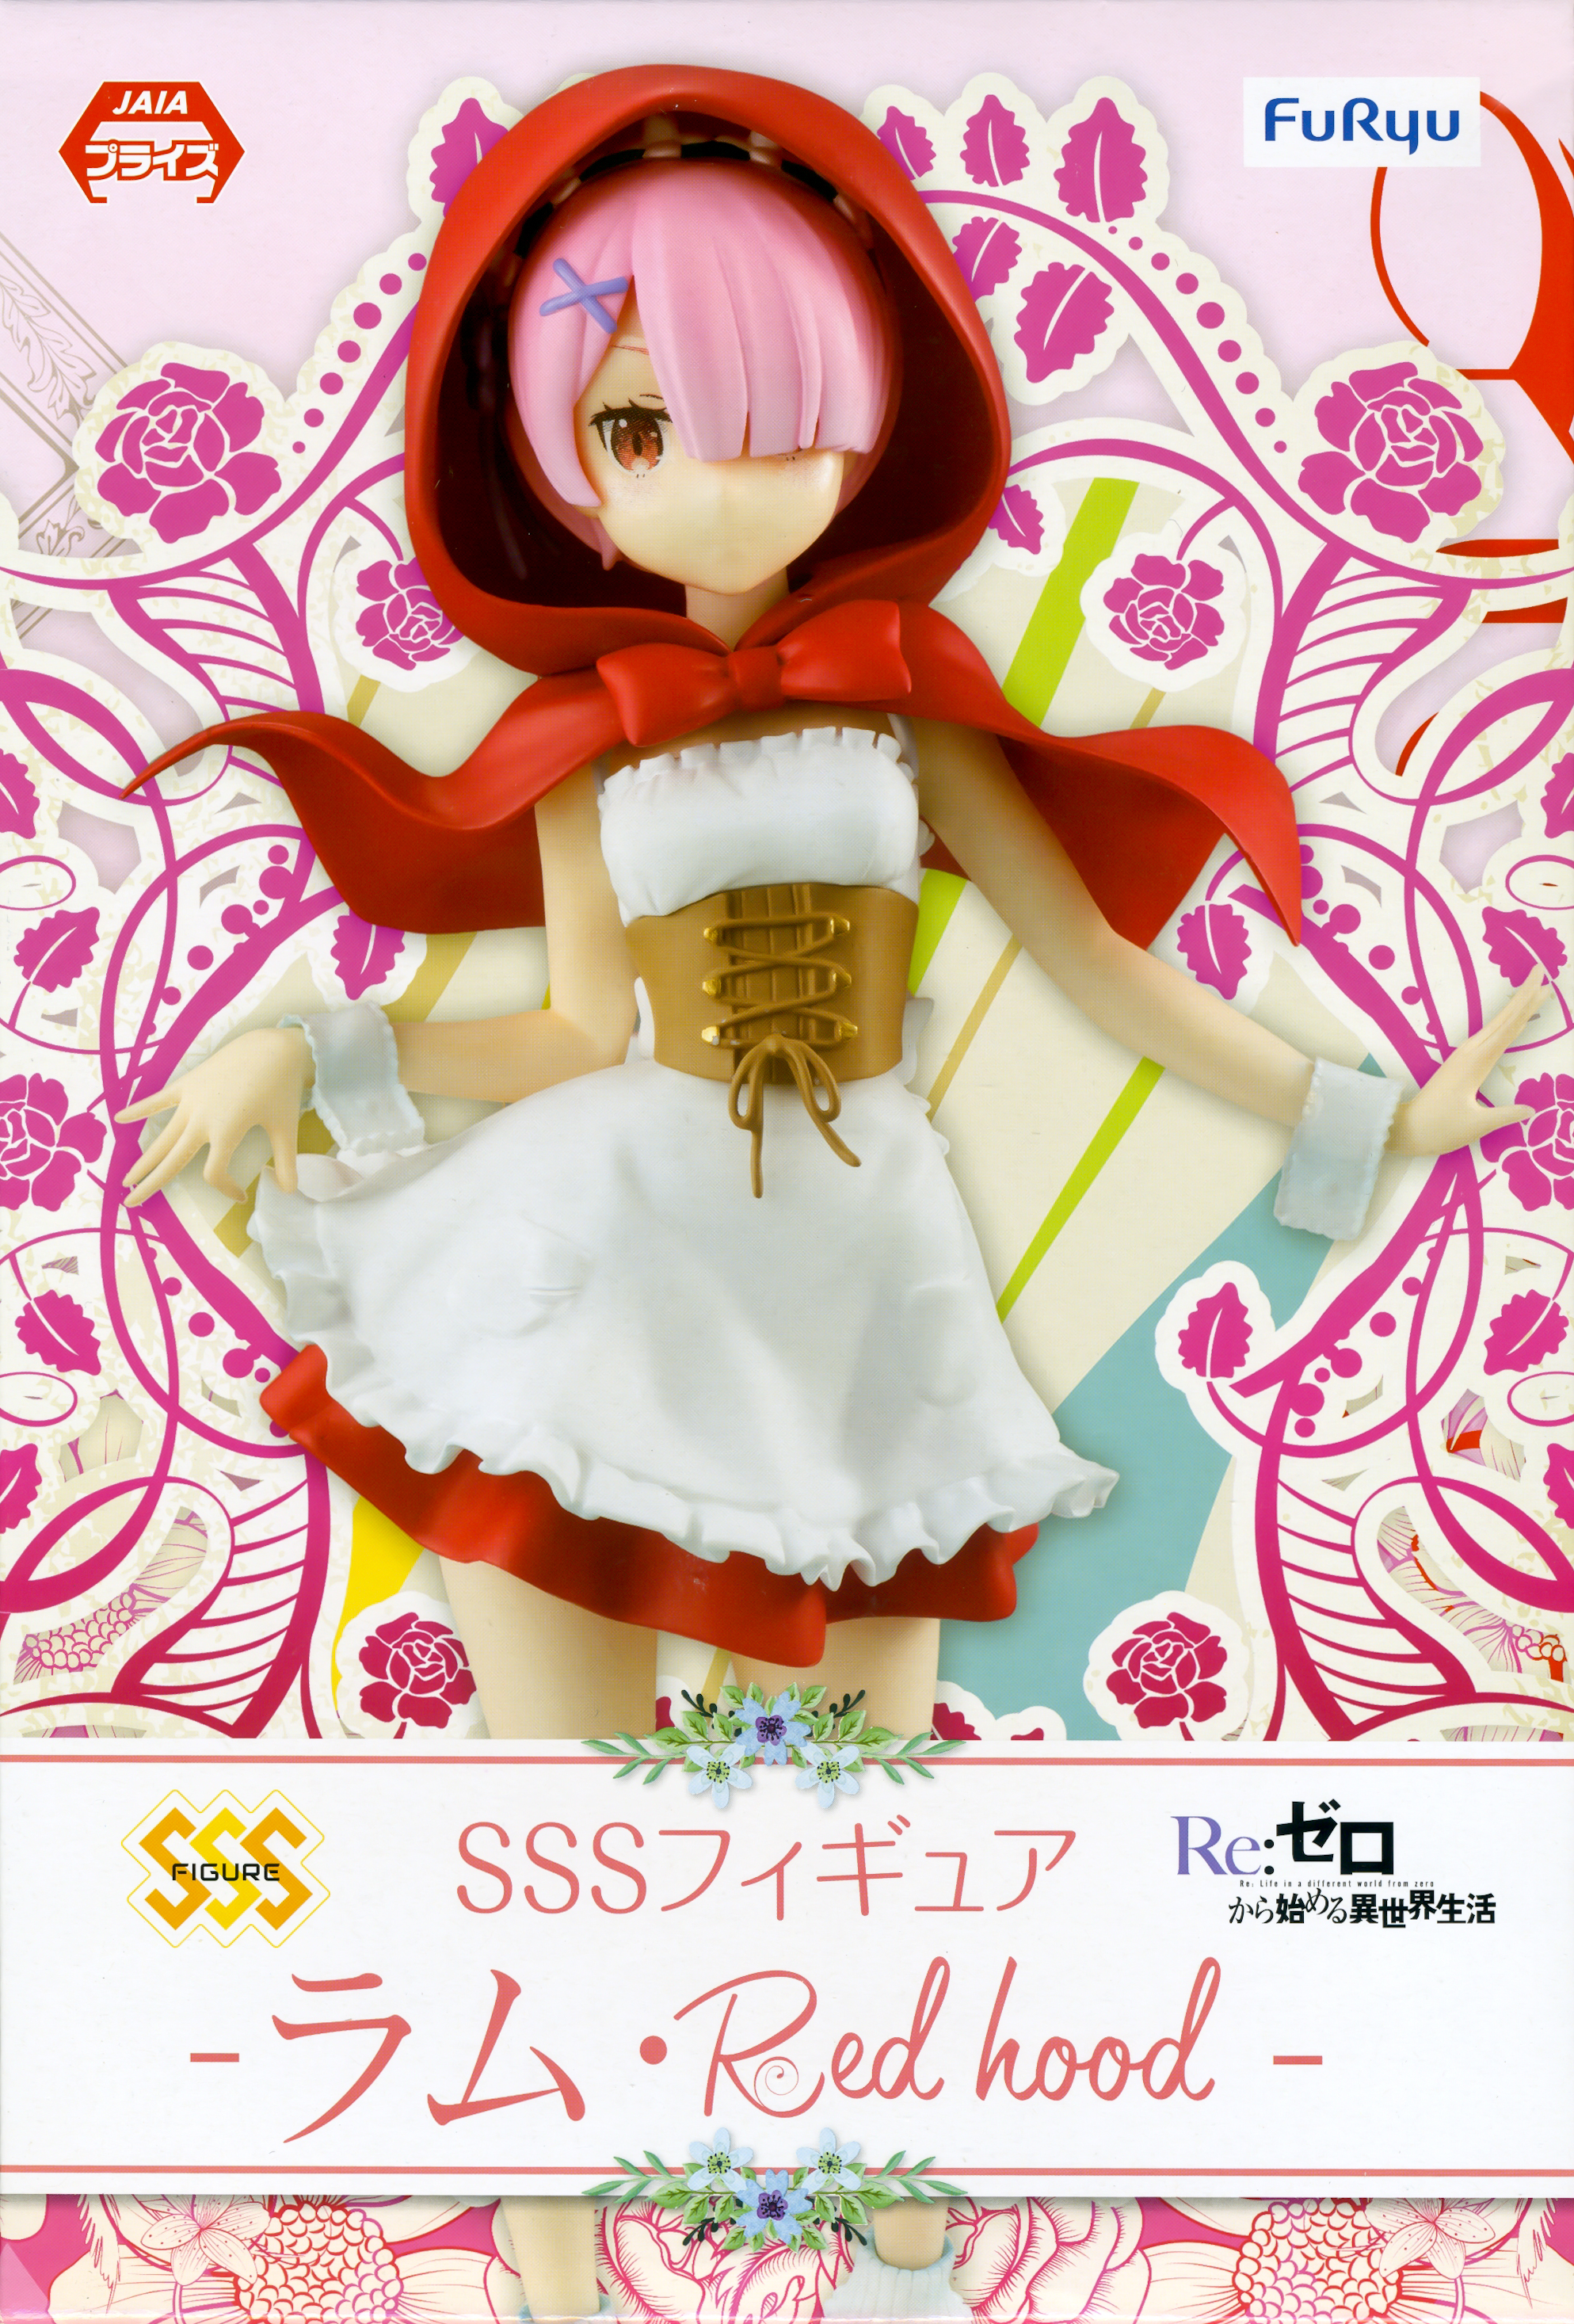 Ram, Red Hood Figure, Re:Zero - Starting Life in Another World, SSS Figure, Furyu